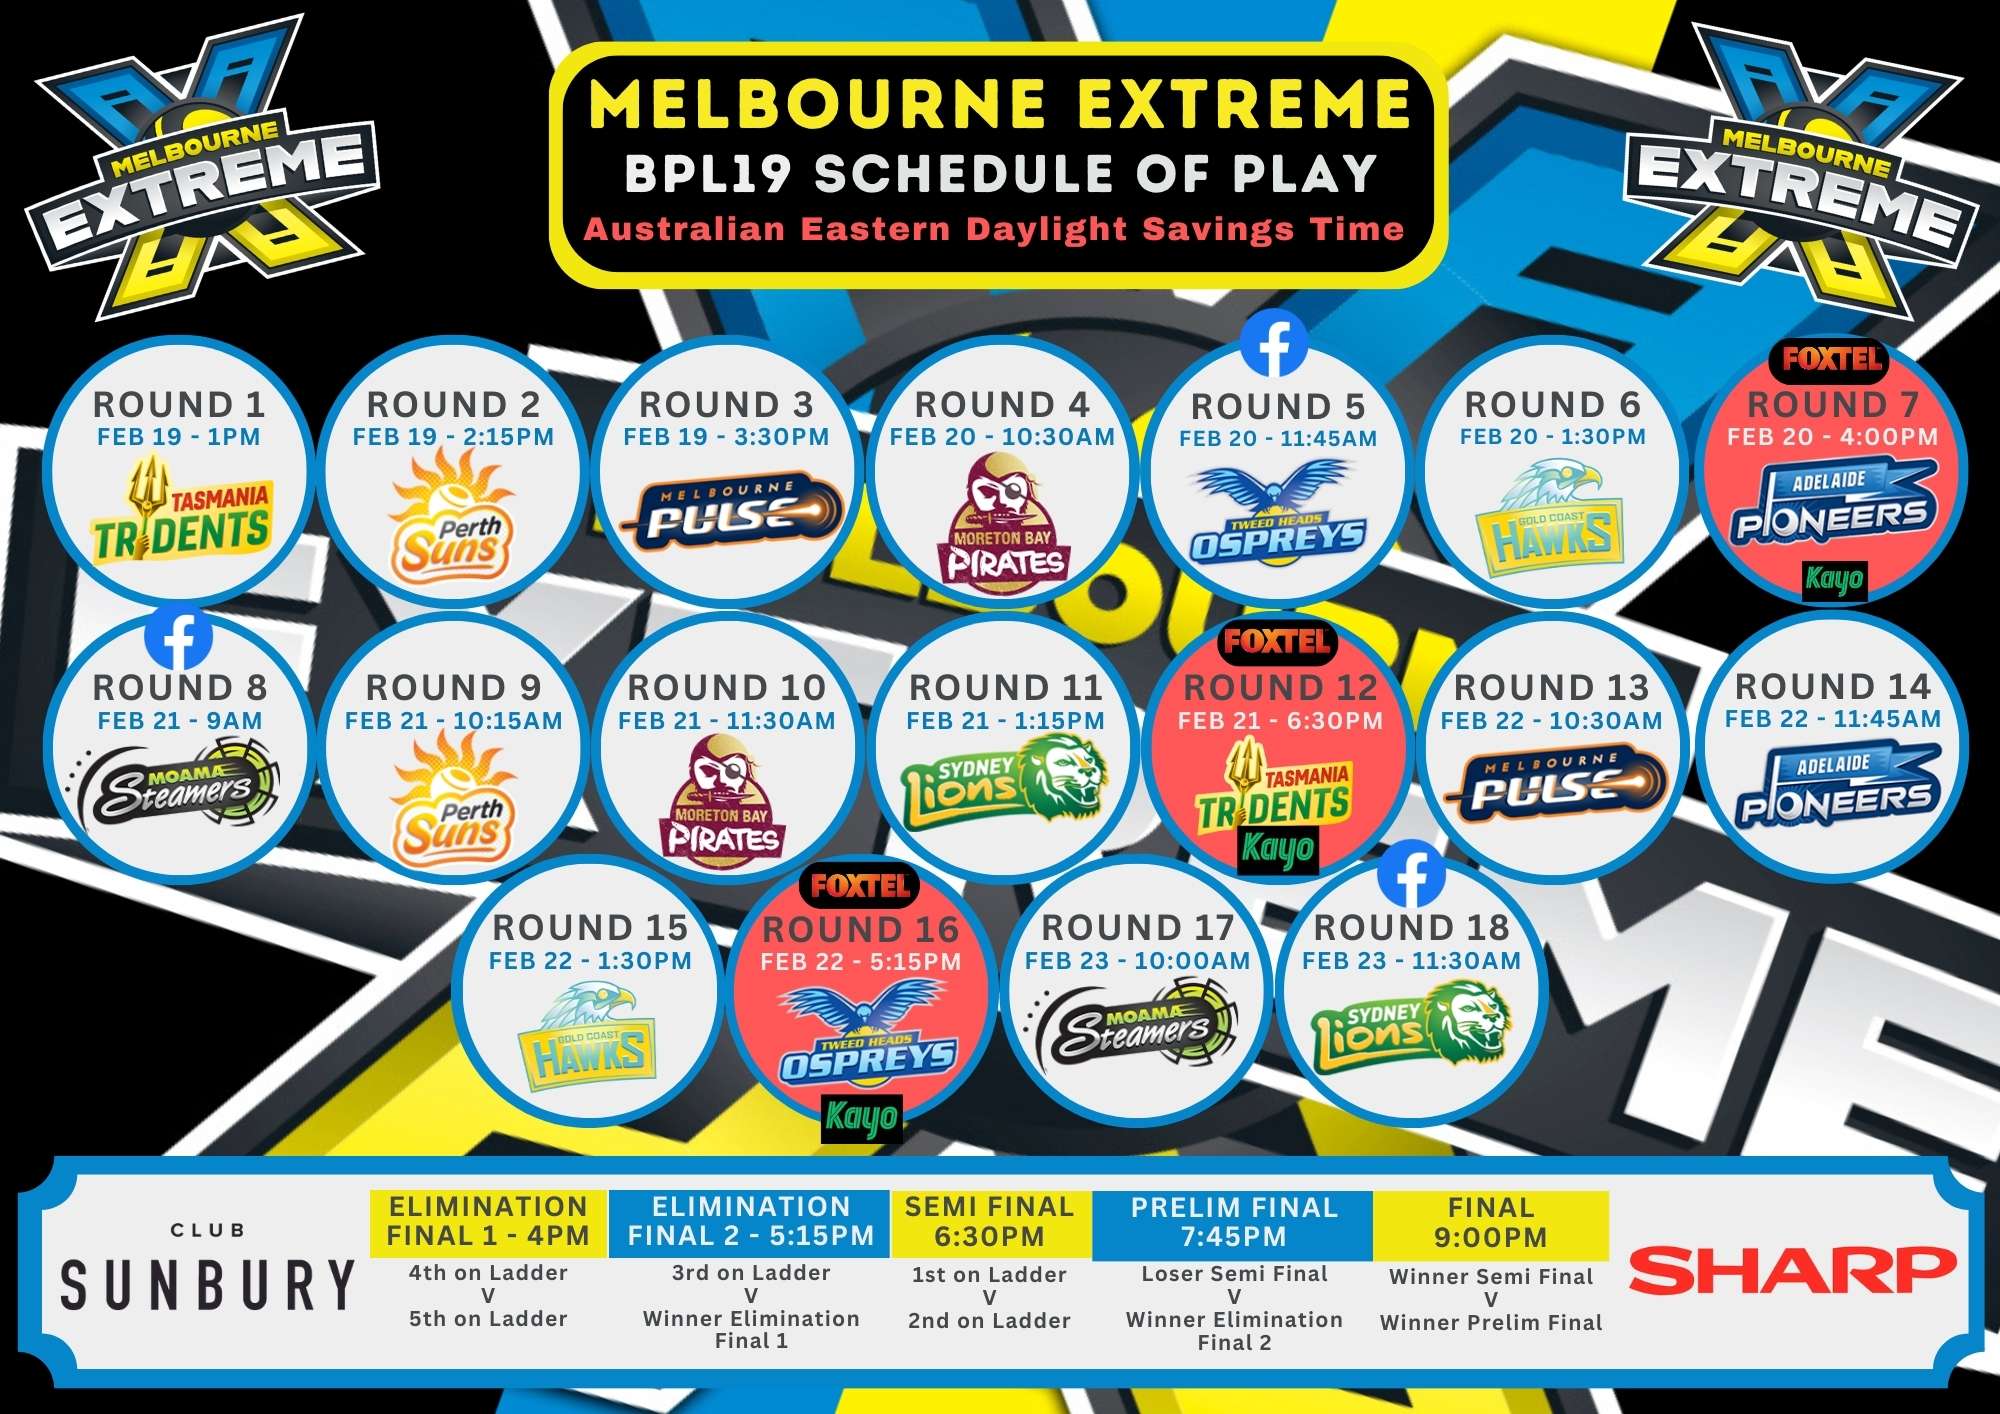 Melbourne Extreme SCHEDULE OF PLAY BPL19